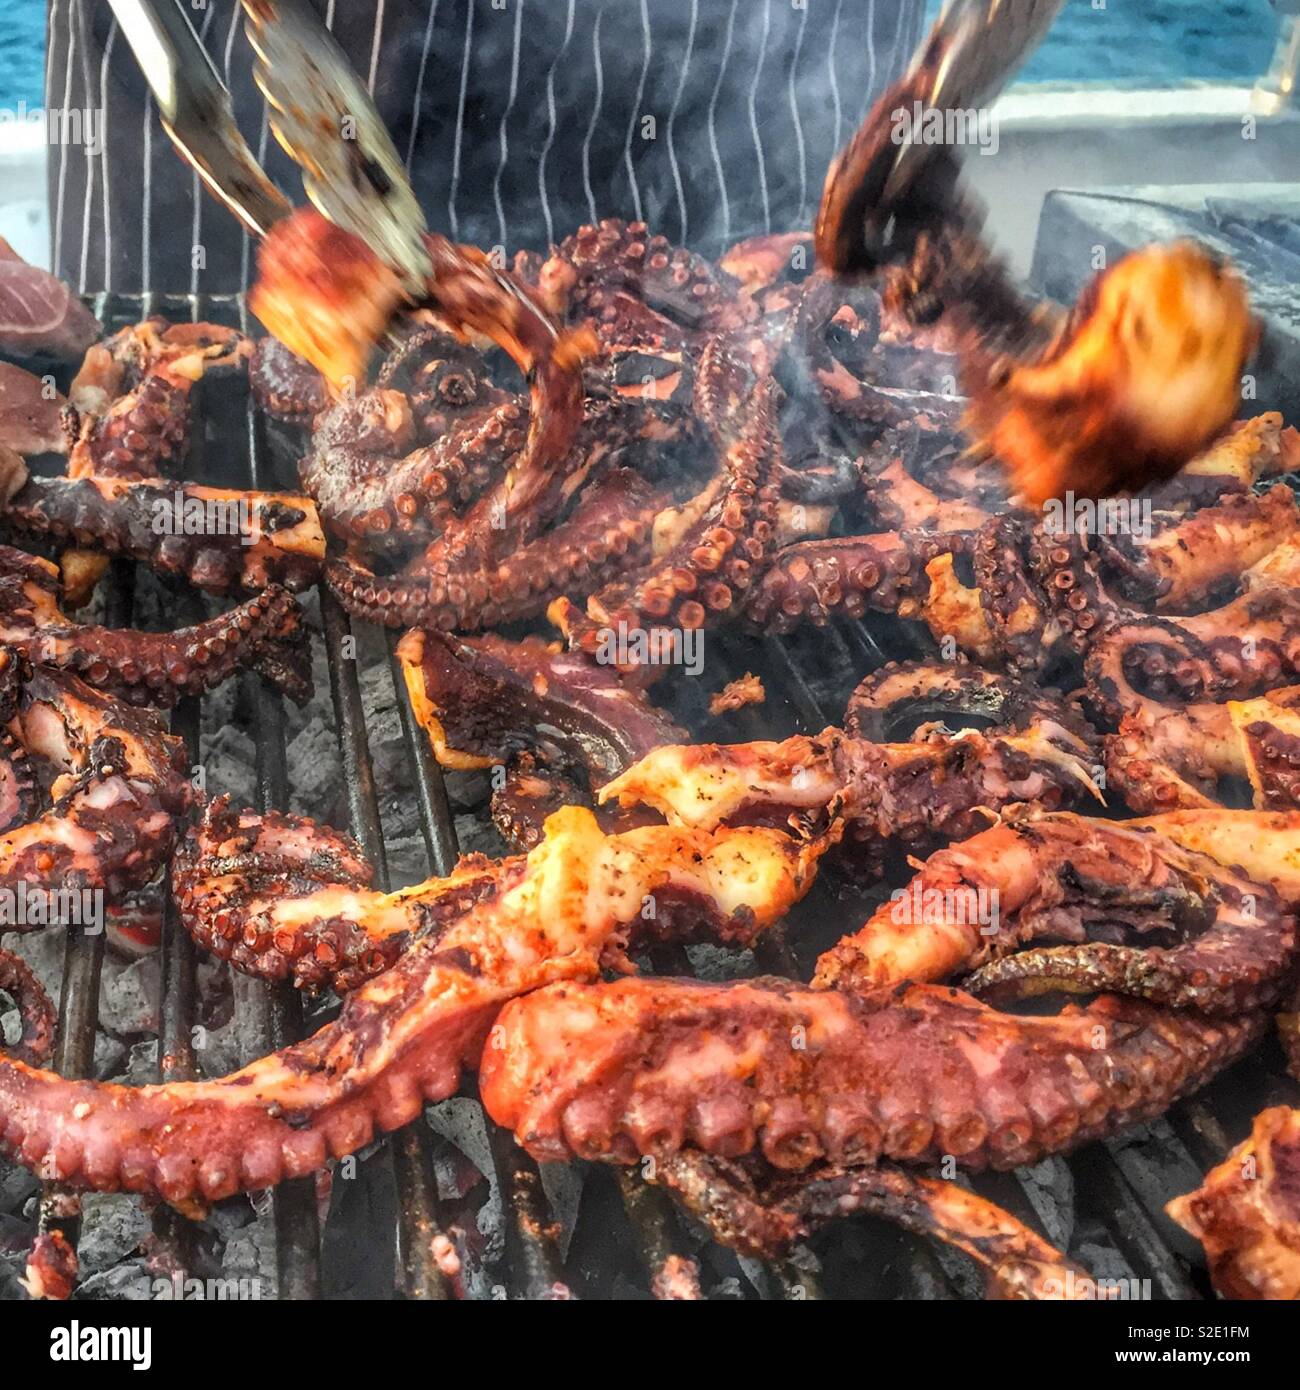 Chef tosses Octopus tentacles while cooking on outdoor grill or bbq. Person cooks octopus, seafood on bbq. Stock Photo